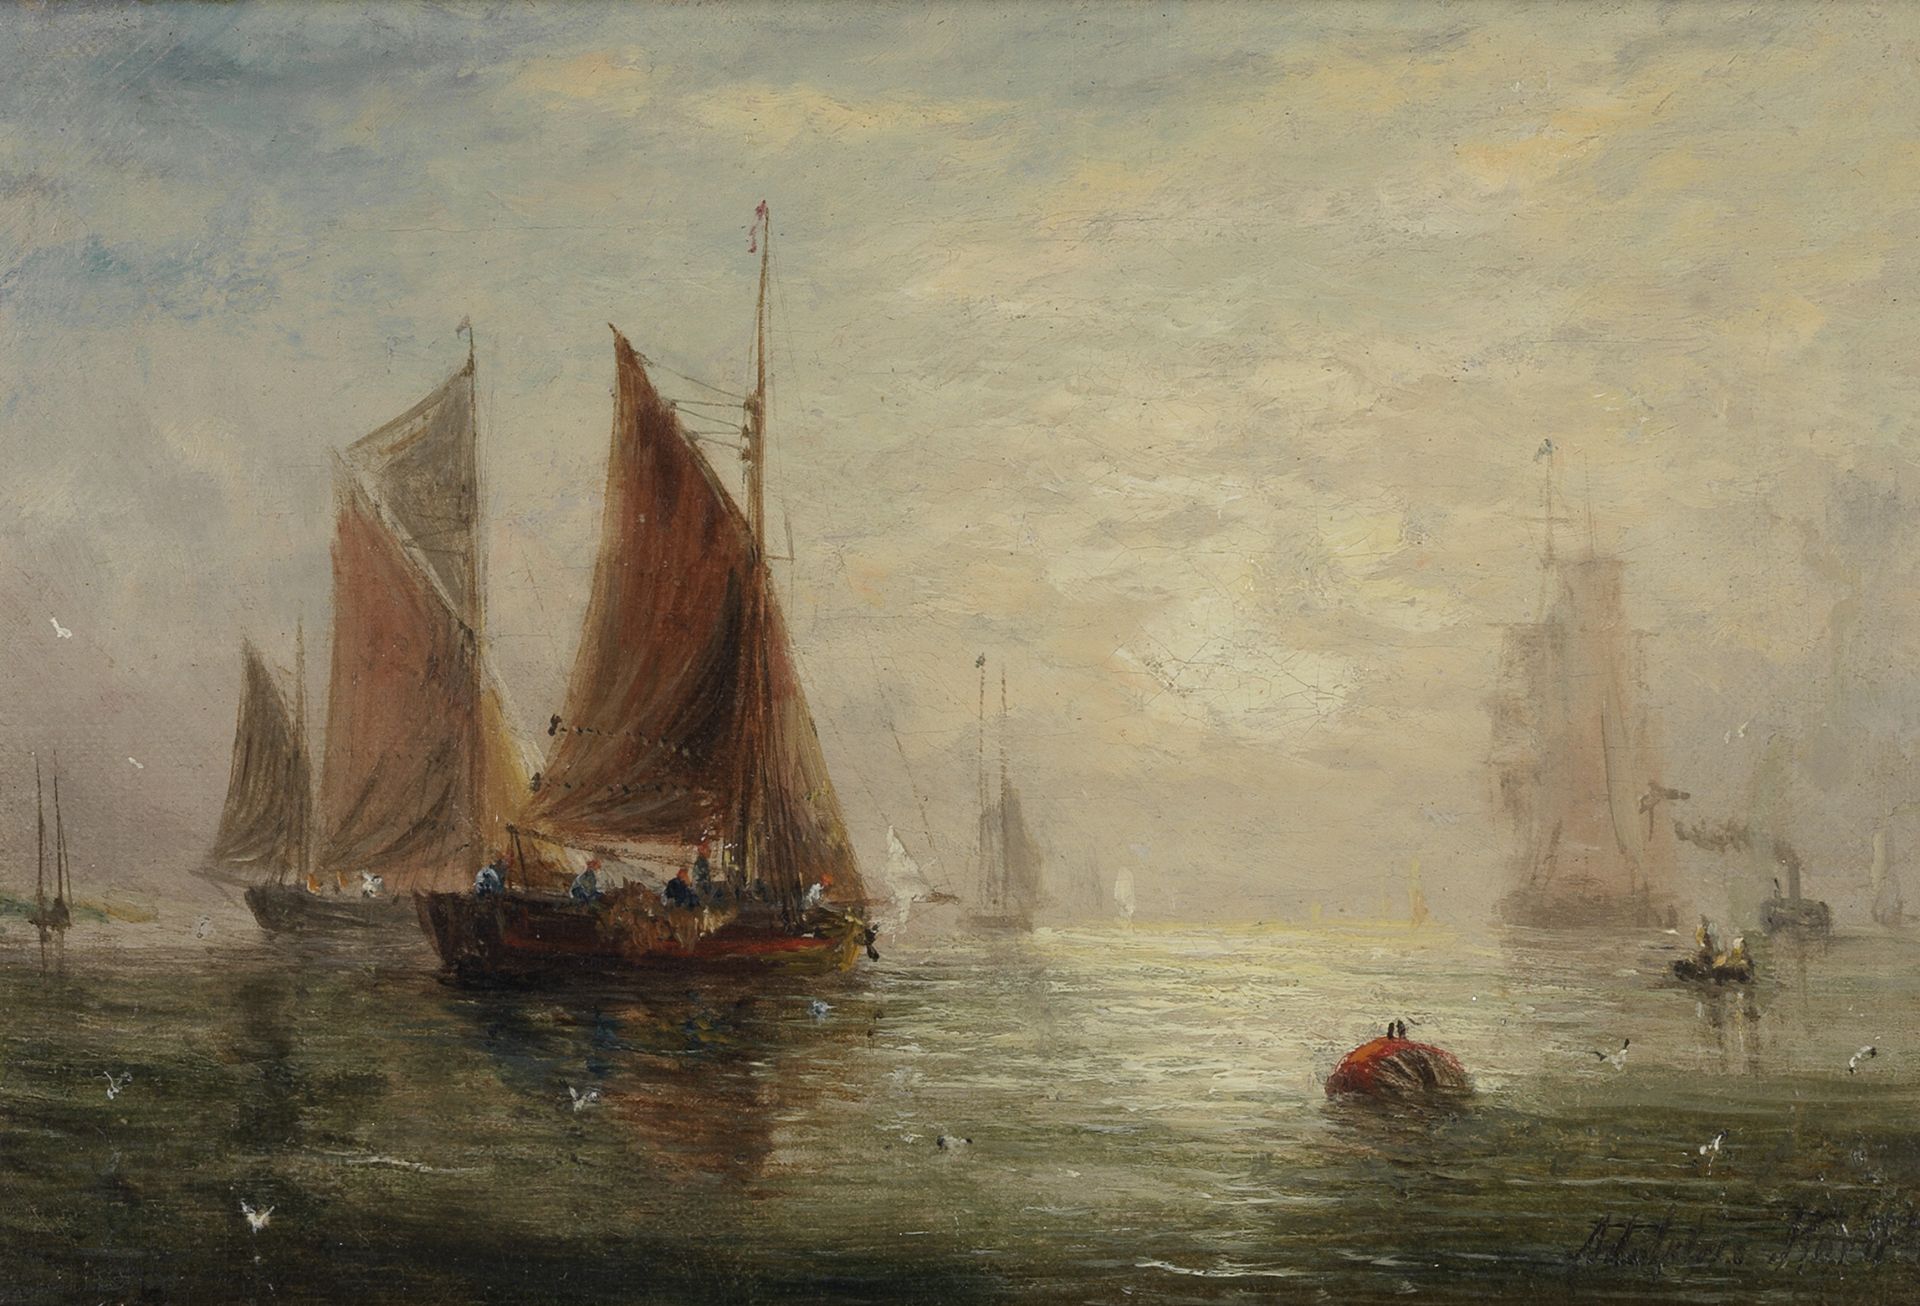 Adolphus Knell (British, active 1860-1890) Shipping at dawn; Ships by moonlight, a pair